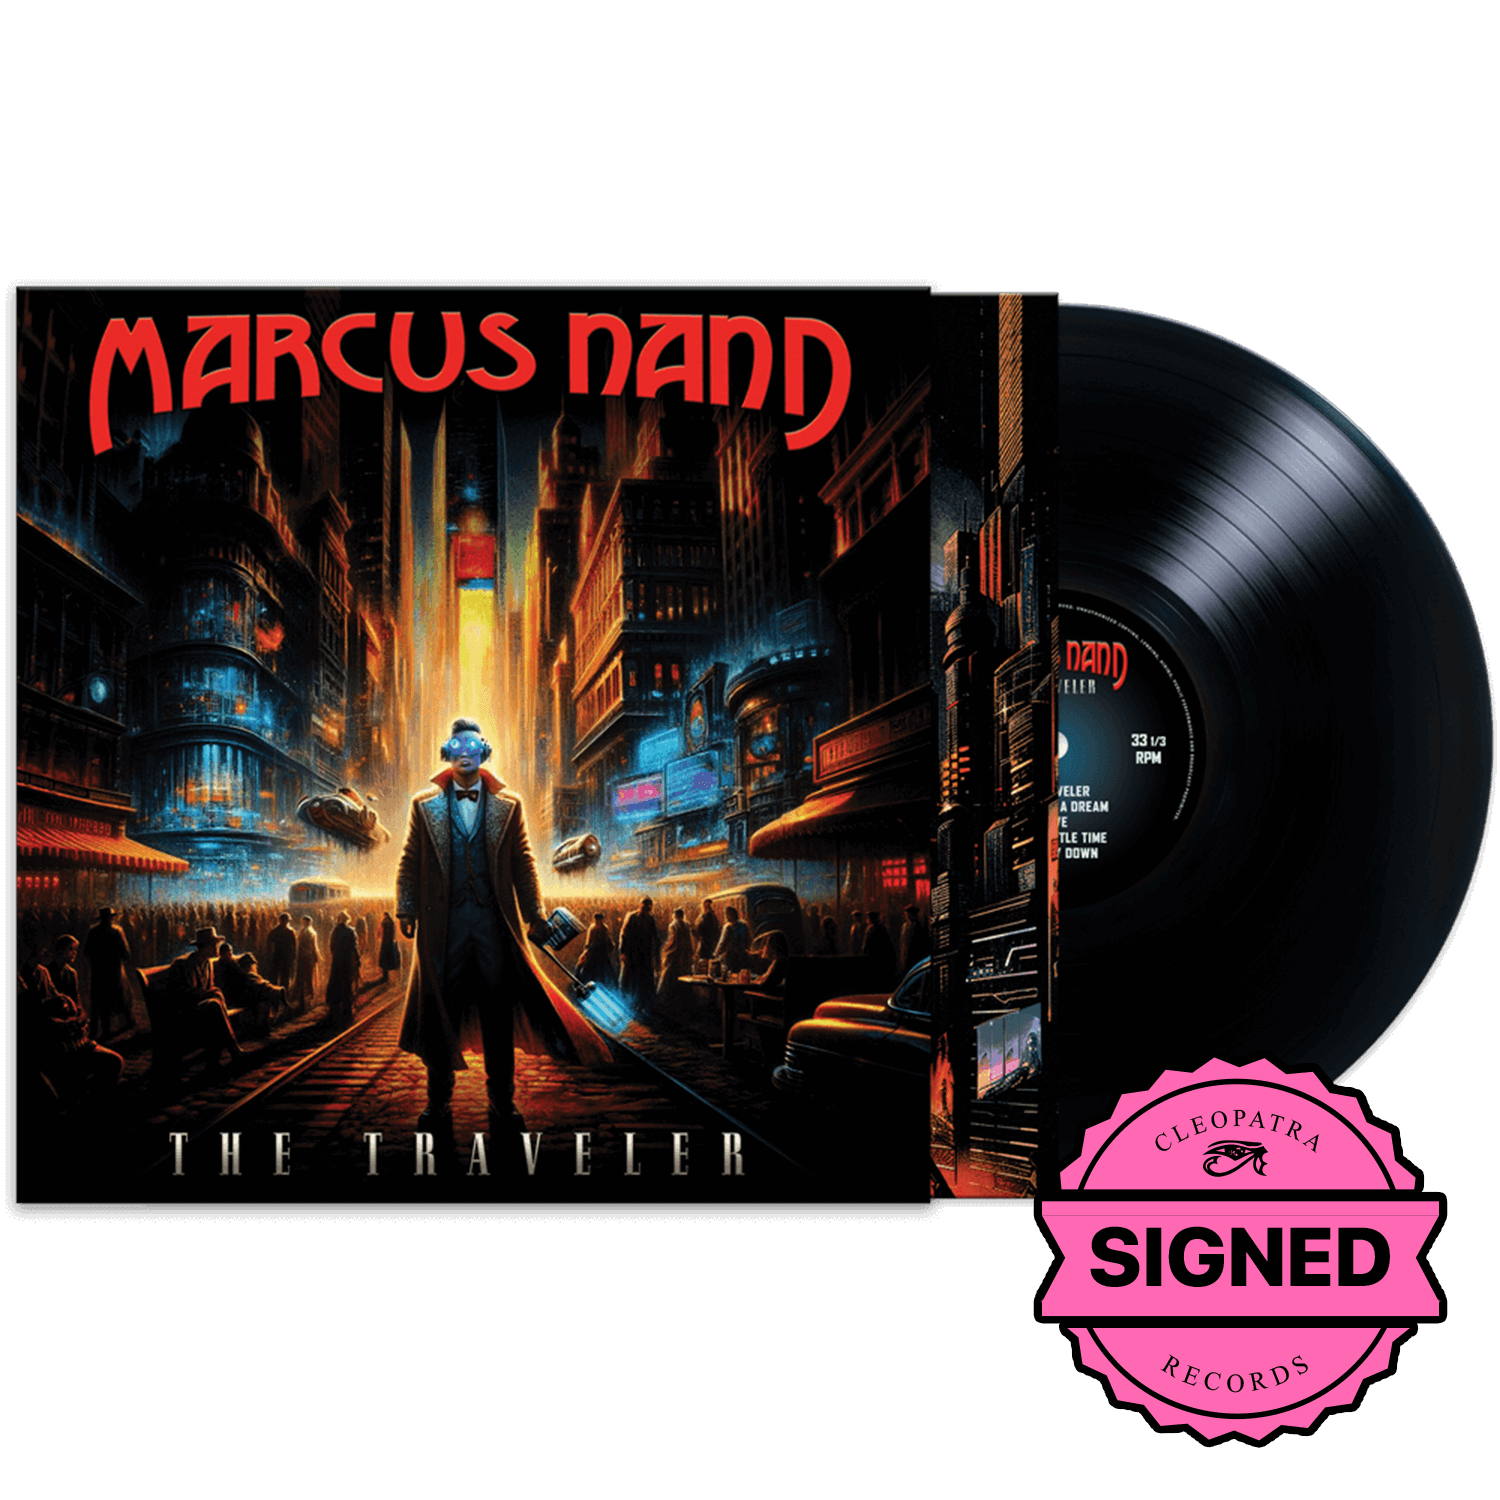 Marcus Nand - The Traveler (Black Vinyl - Signed by Marcus Nand)